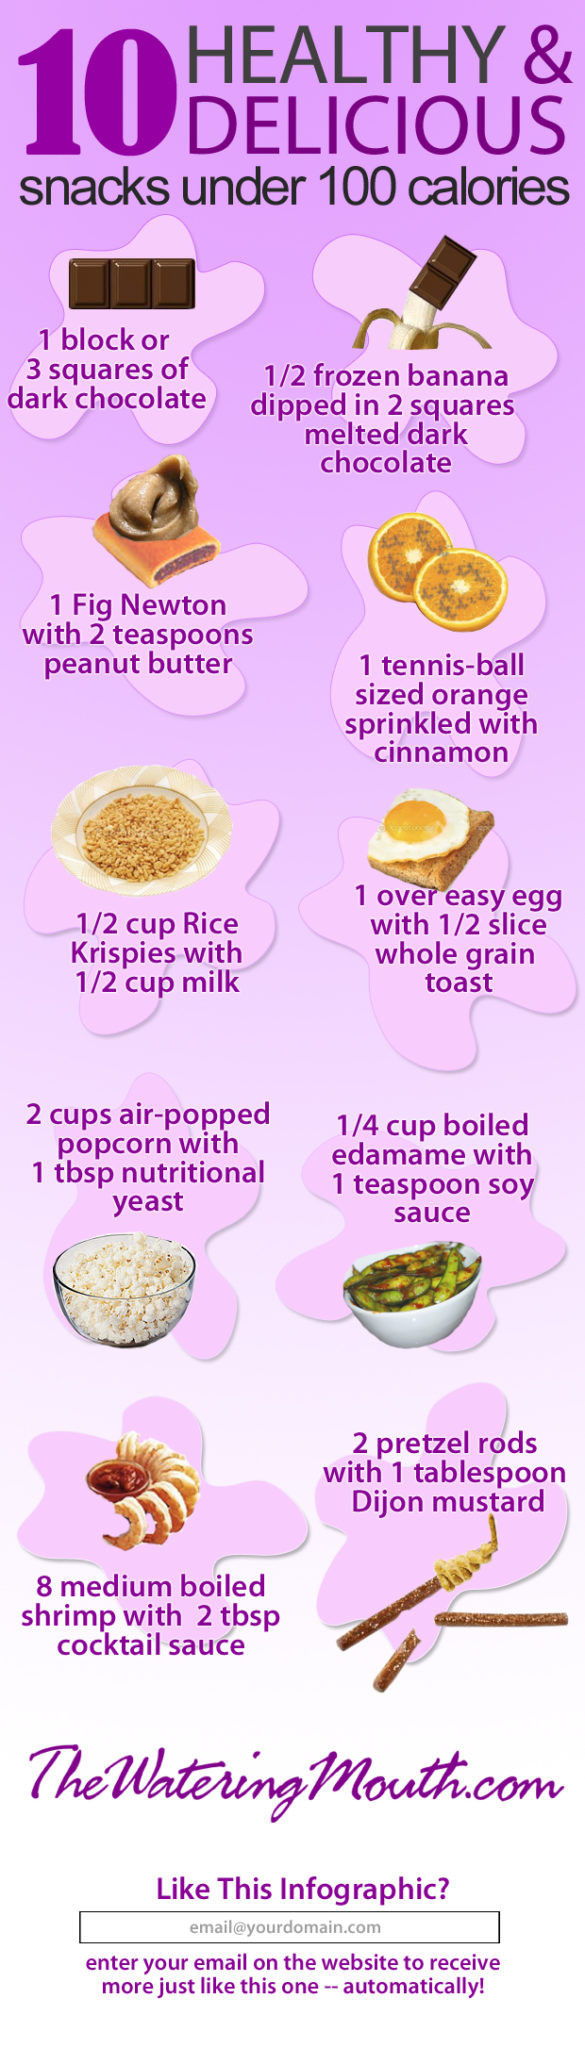 Healthy Snacks Under 100 Calories
 10 Healthy Snacks Under 100 Calories [ infographic] The